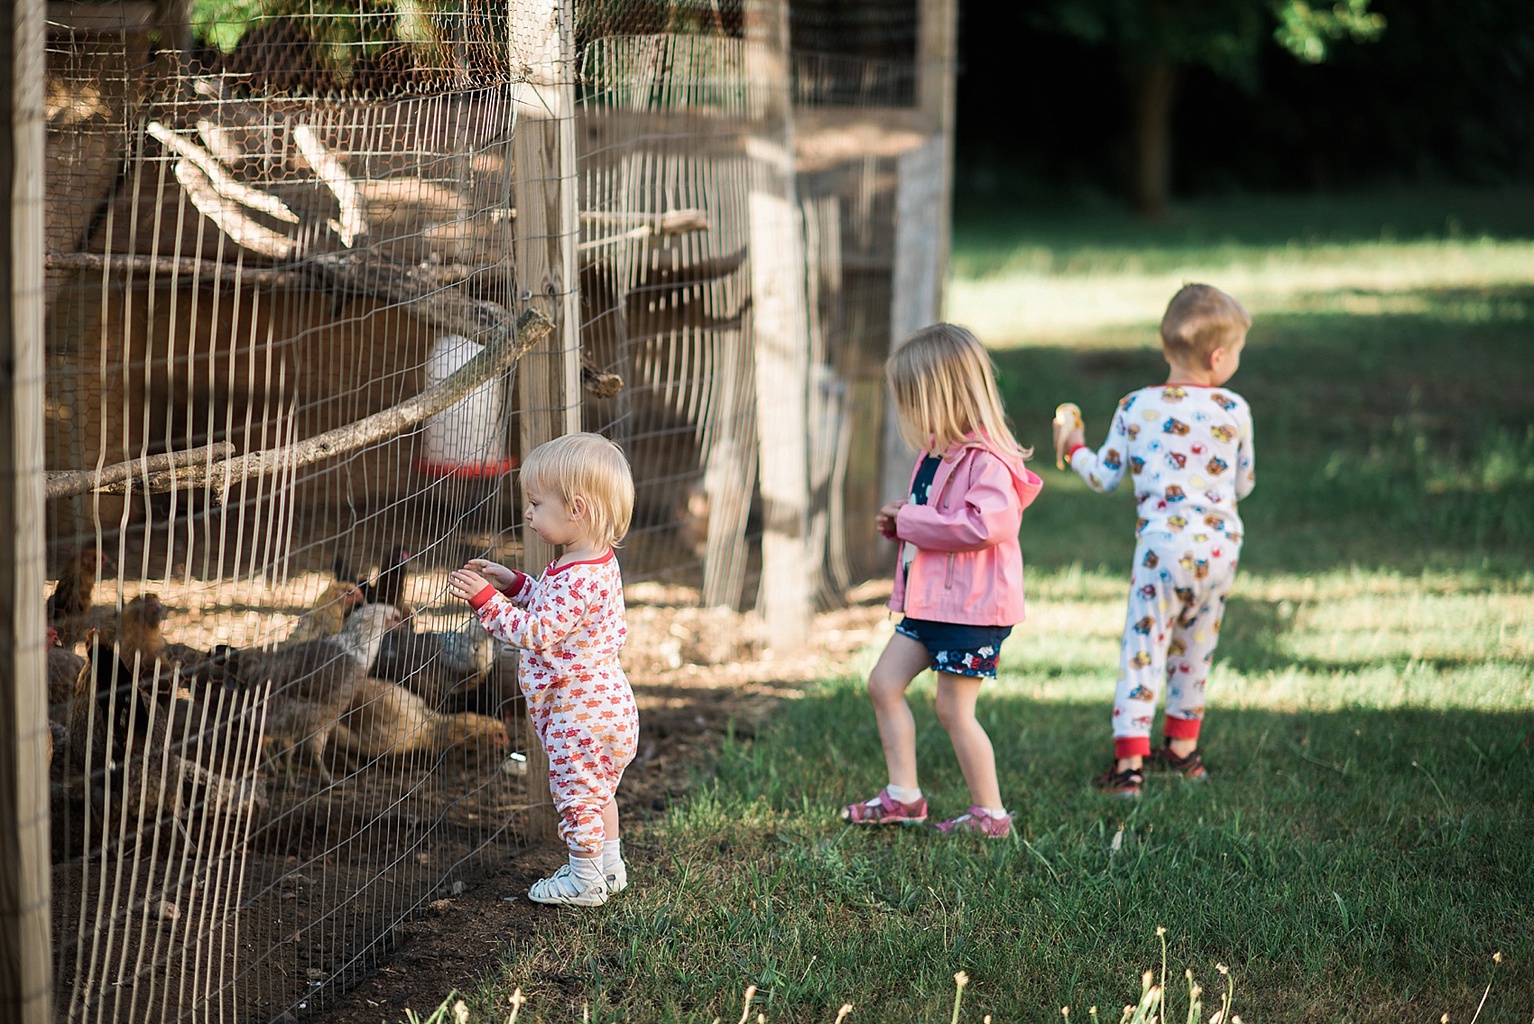 Kids playing near a chicken coop in the Saugatuck, Michigan area